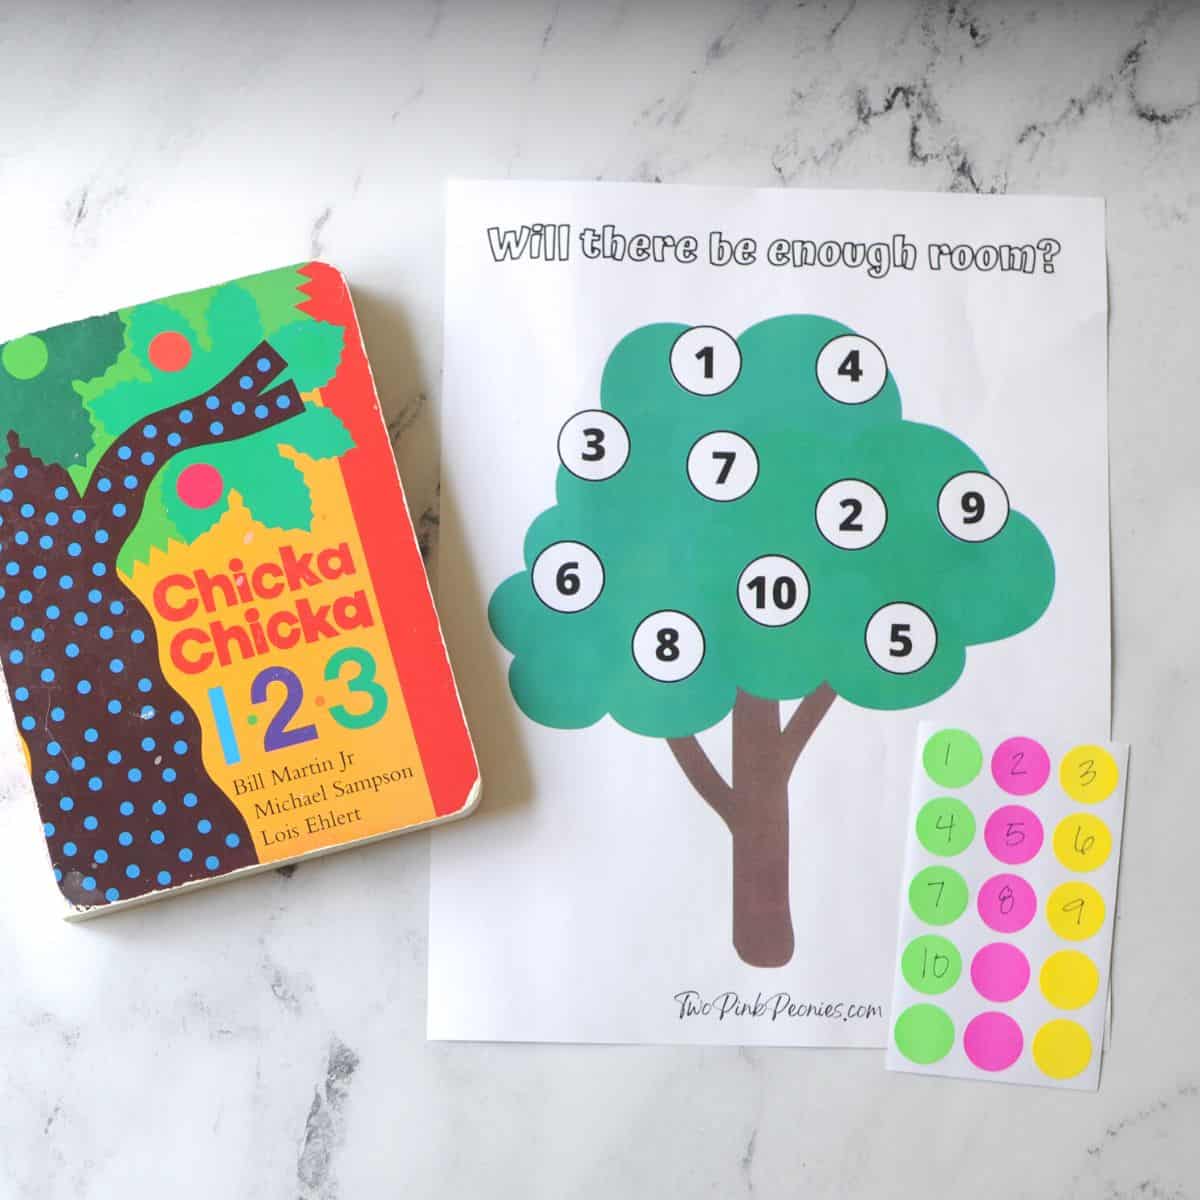 an image with the book Chicka Chicka  1 - 2 - 3, a printable (a tree with numbers on it) and dot stickers